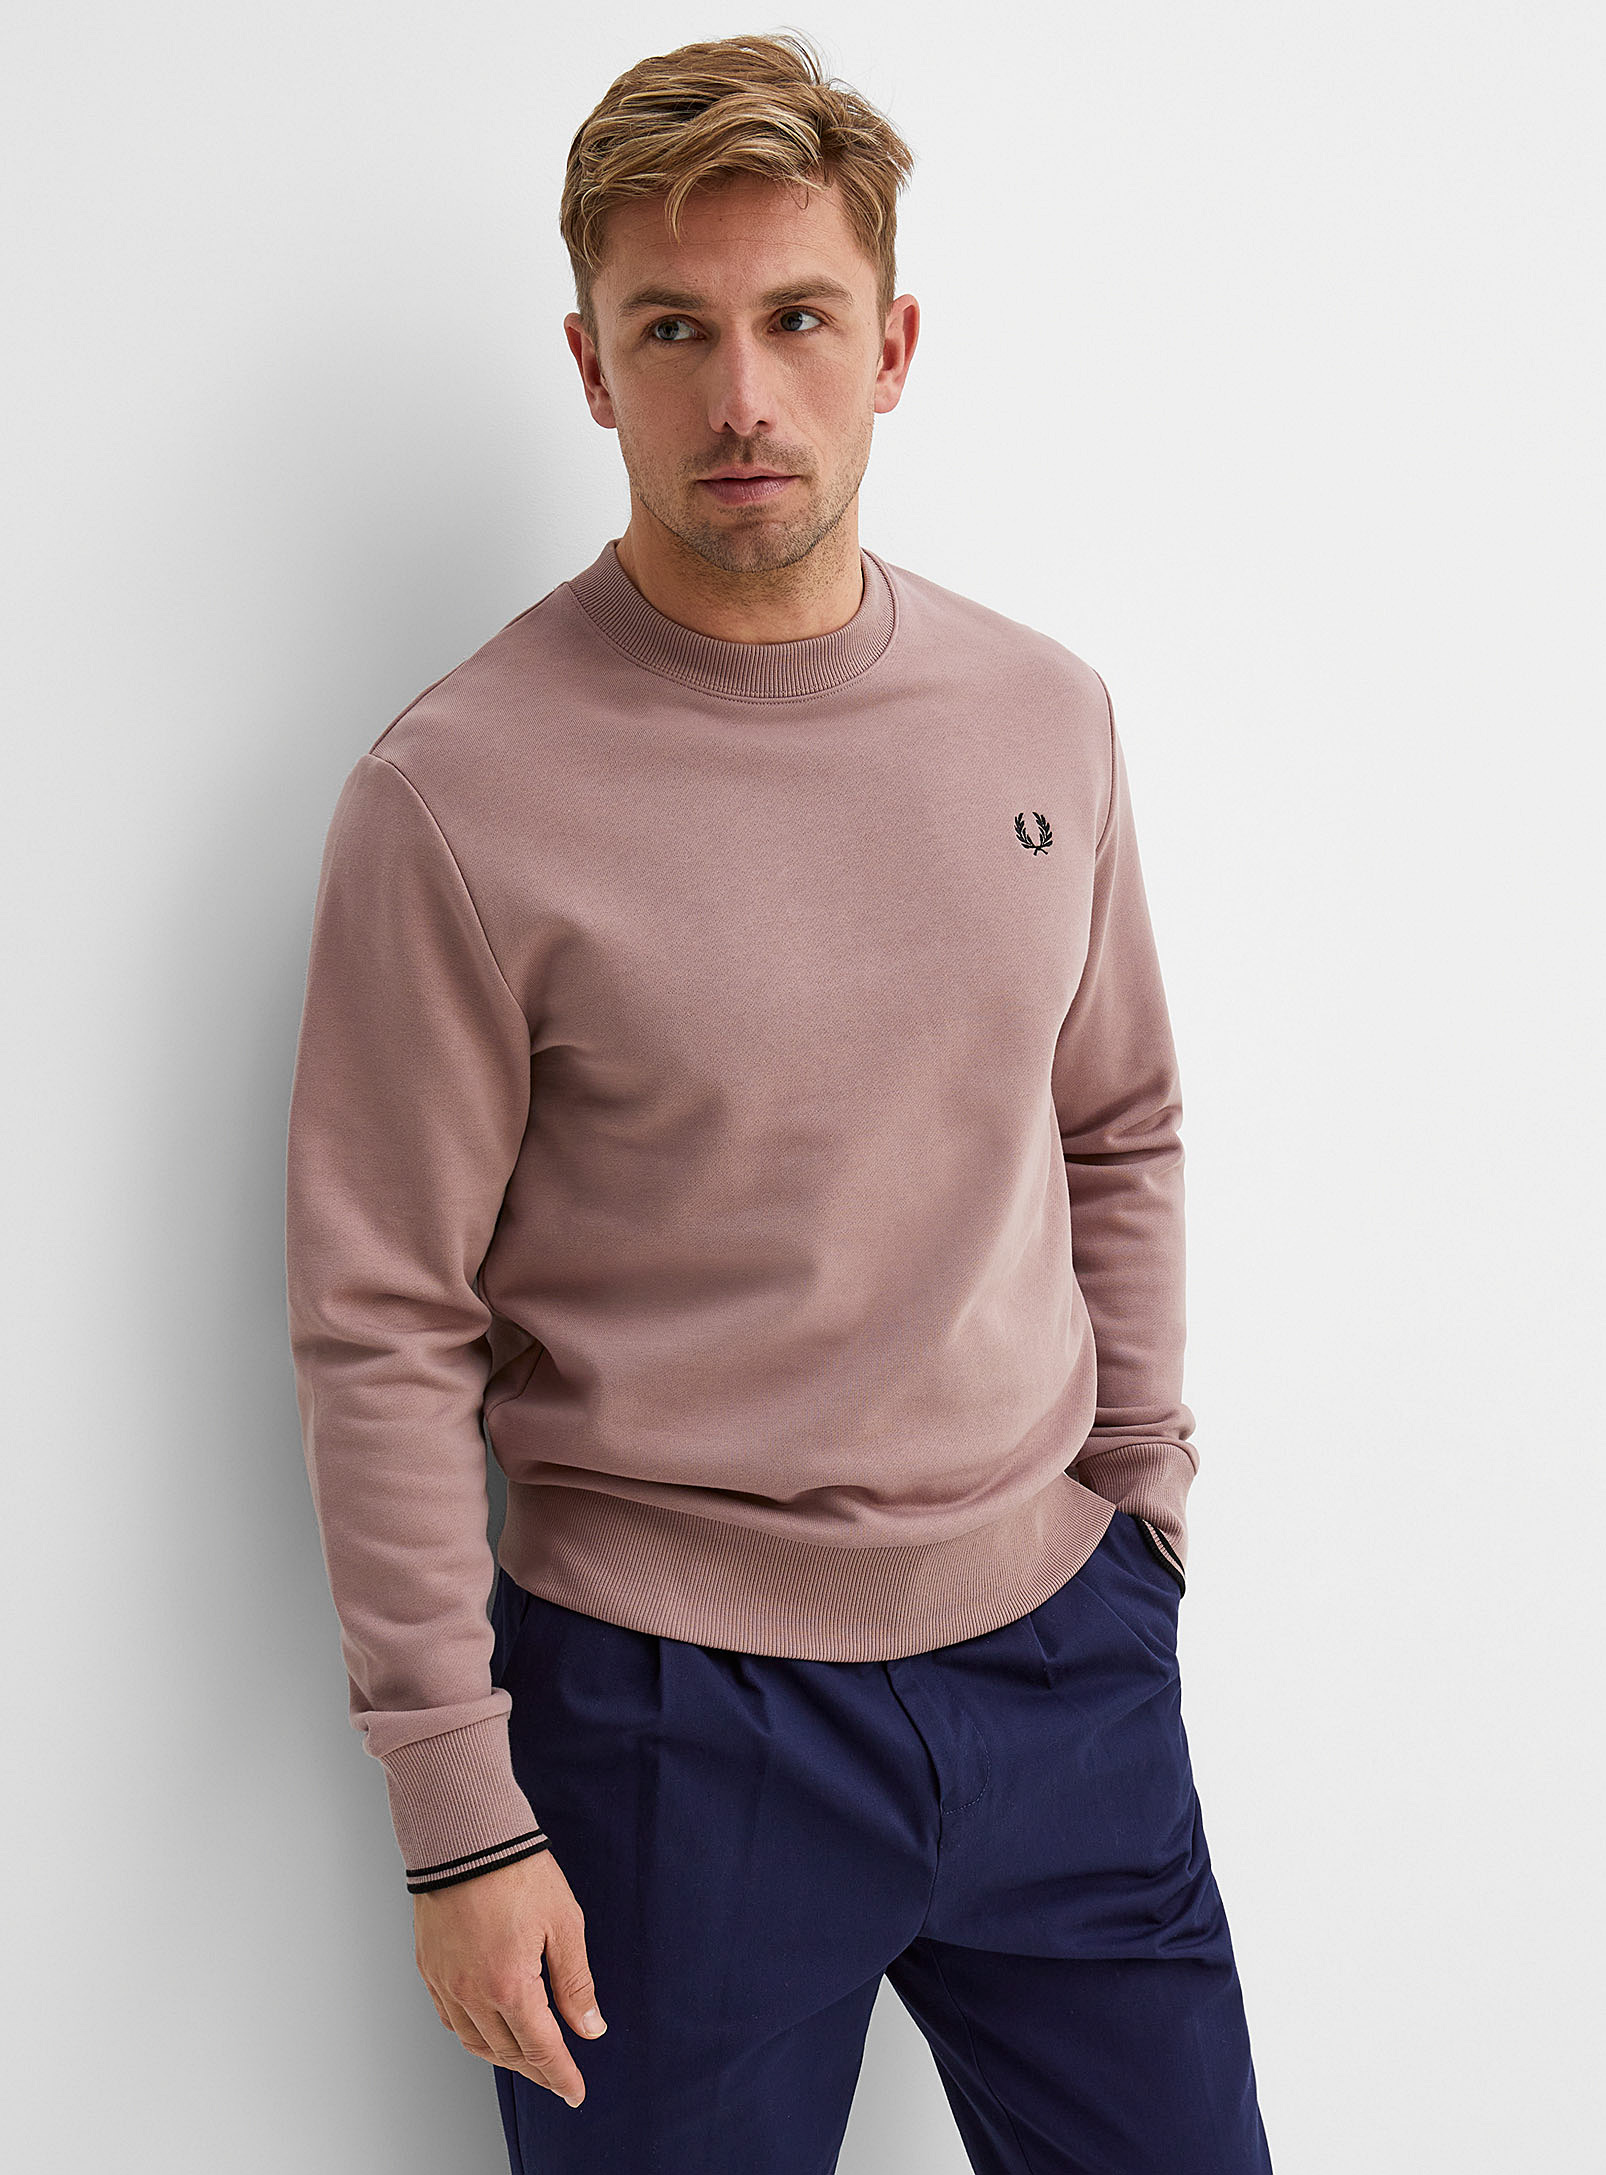 FRED PERRY EMBROIDERED EMBLEM SWEATSHIRT